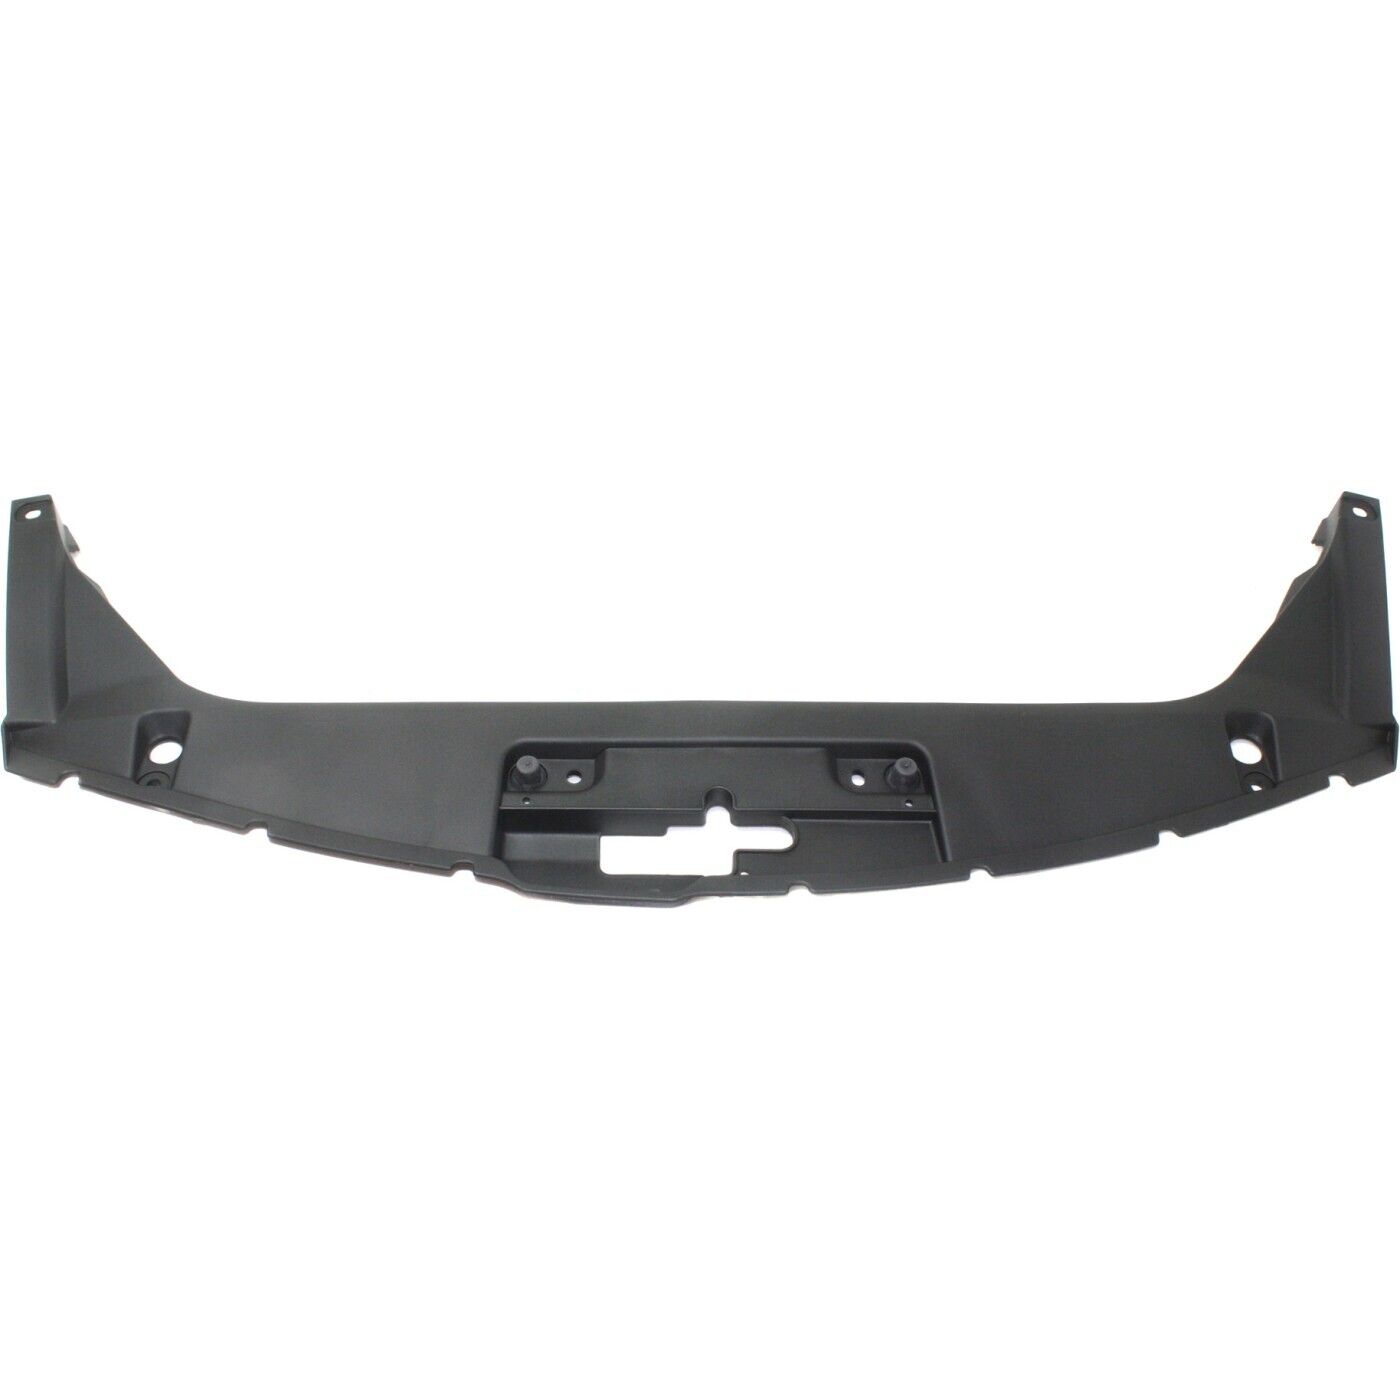 Radiator Support Cover For 2008-2012 Honda Accord 2 Door Coupe Upper 71123TE0A00